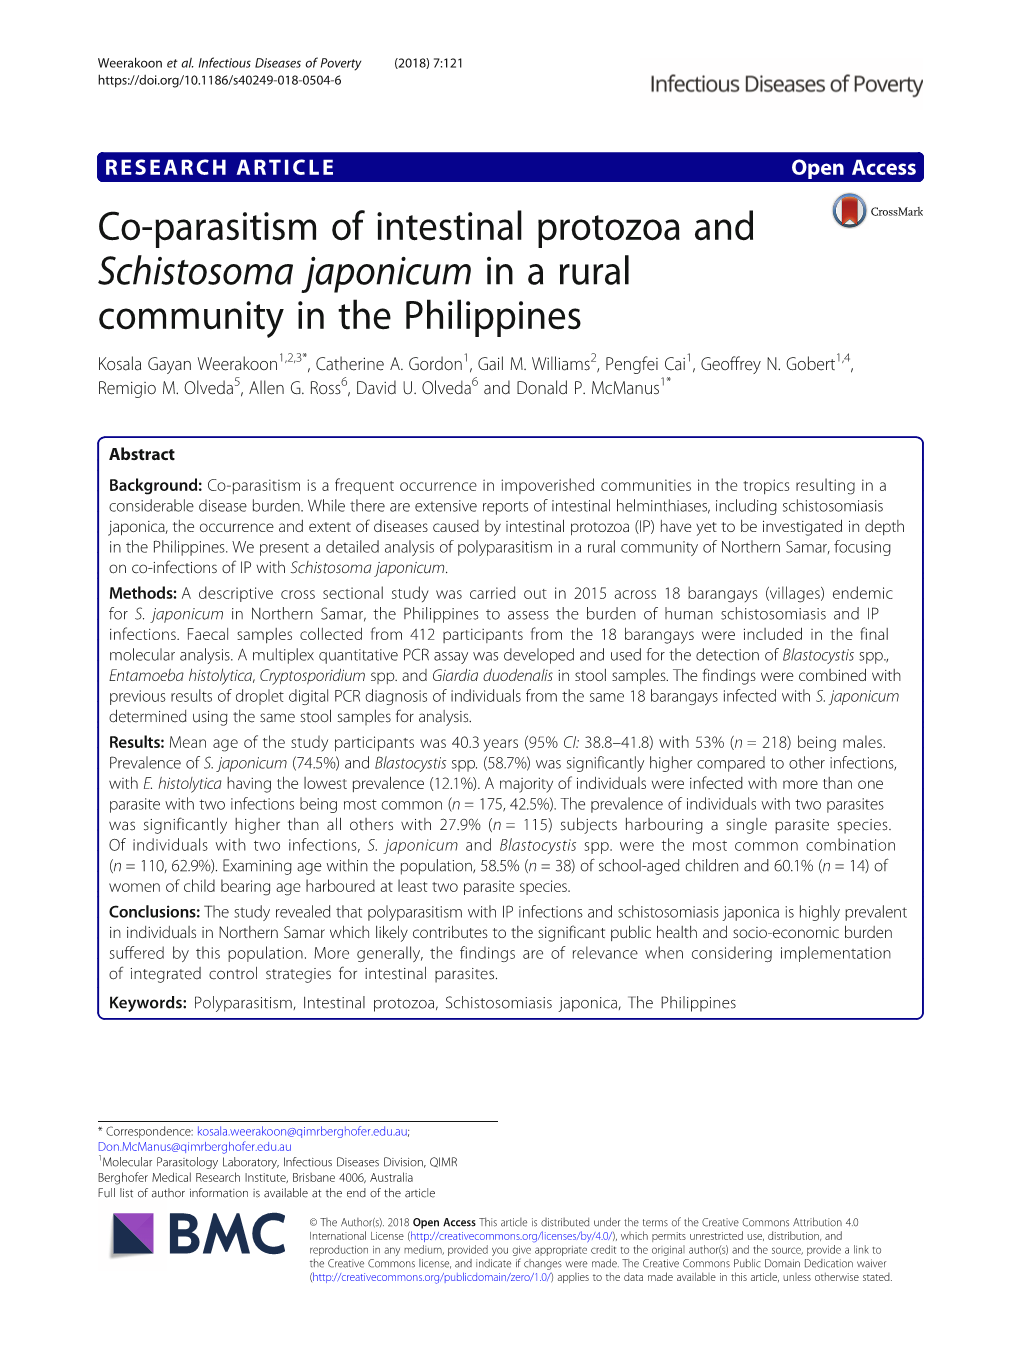 Co-Parasitism of Intestinal Protozoa and Schistosoma Japonicum in a Rural Community in the Philippines Kosala Gayan Weerakoon1,2,3*, Catherine A